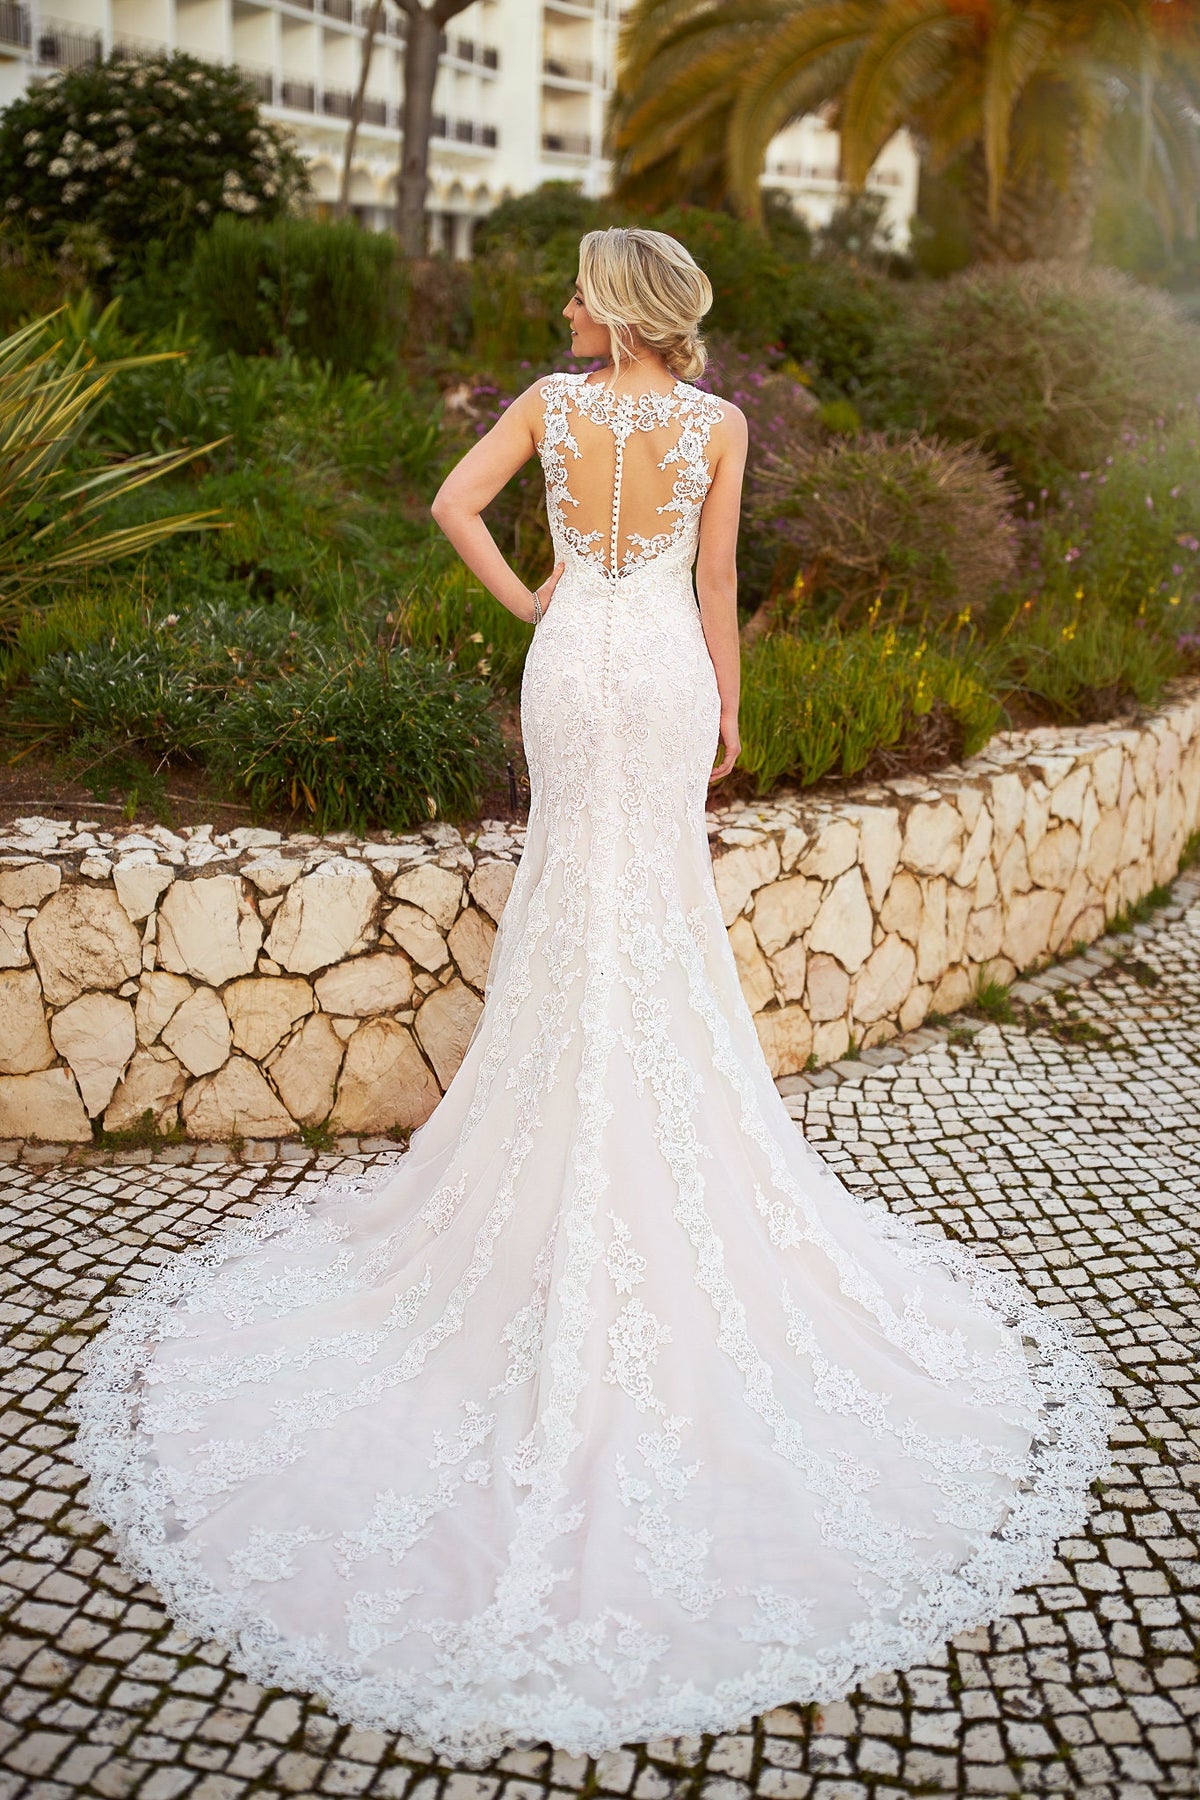 Classic All Over Lace Sleeveless Sleeveless Mermaid Trumpet Wedding Dress Bridal Gown Beautiful Back Deep V Neckline Dramatic Silhouette